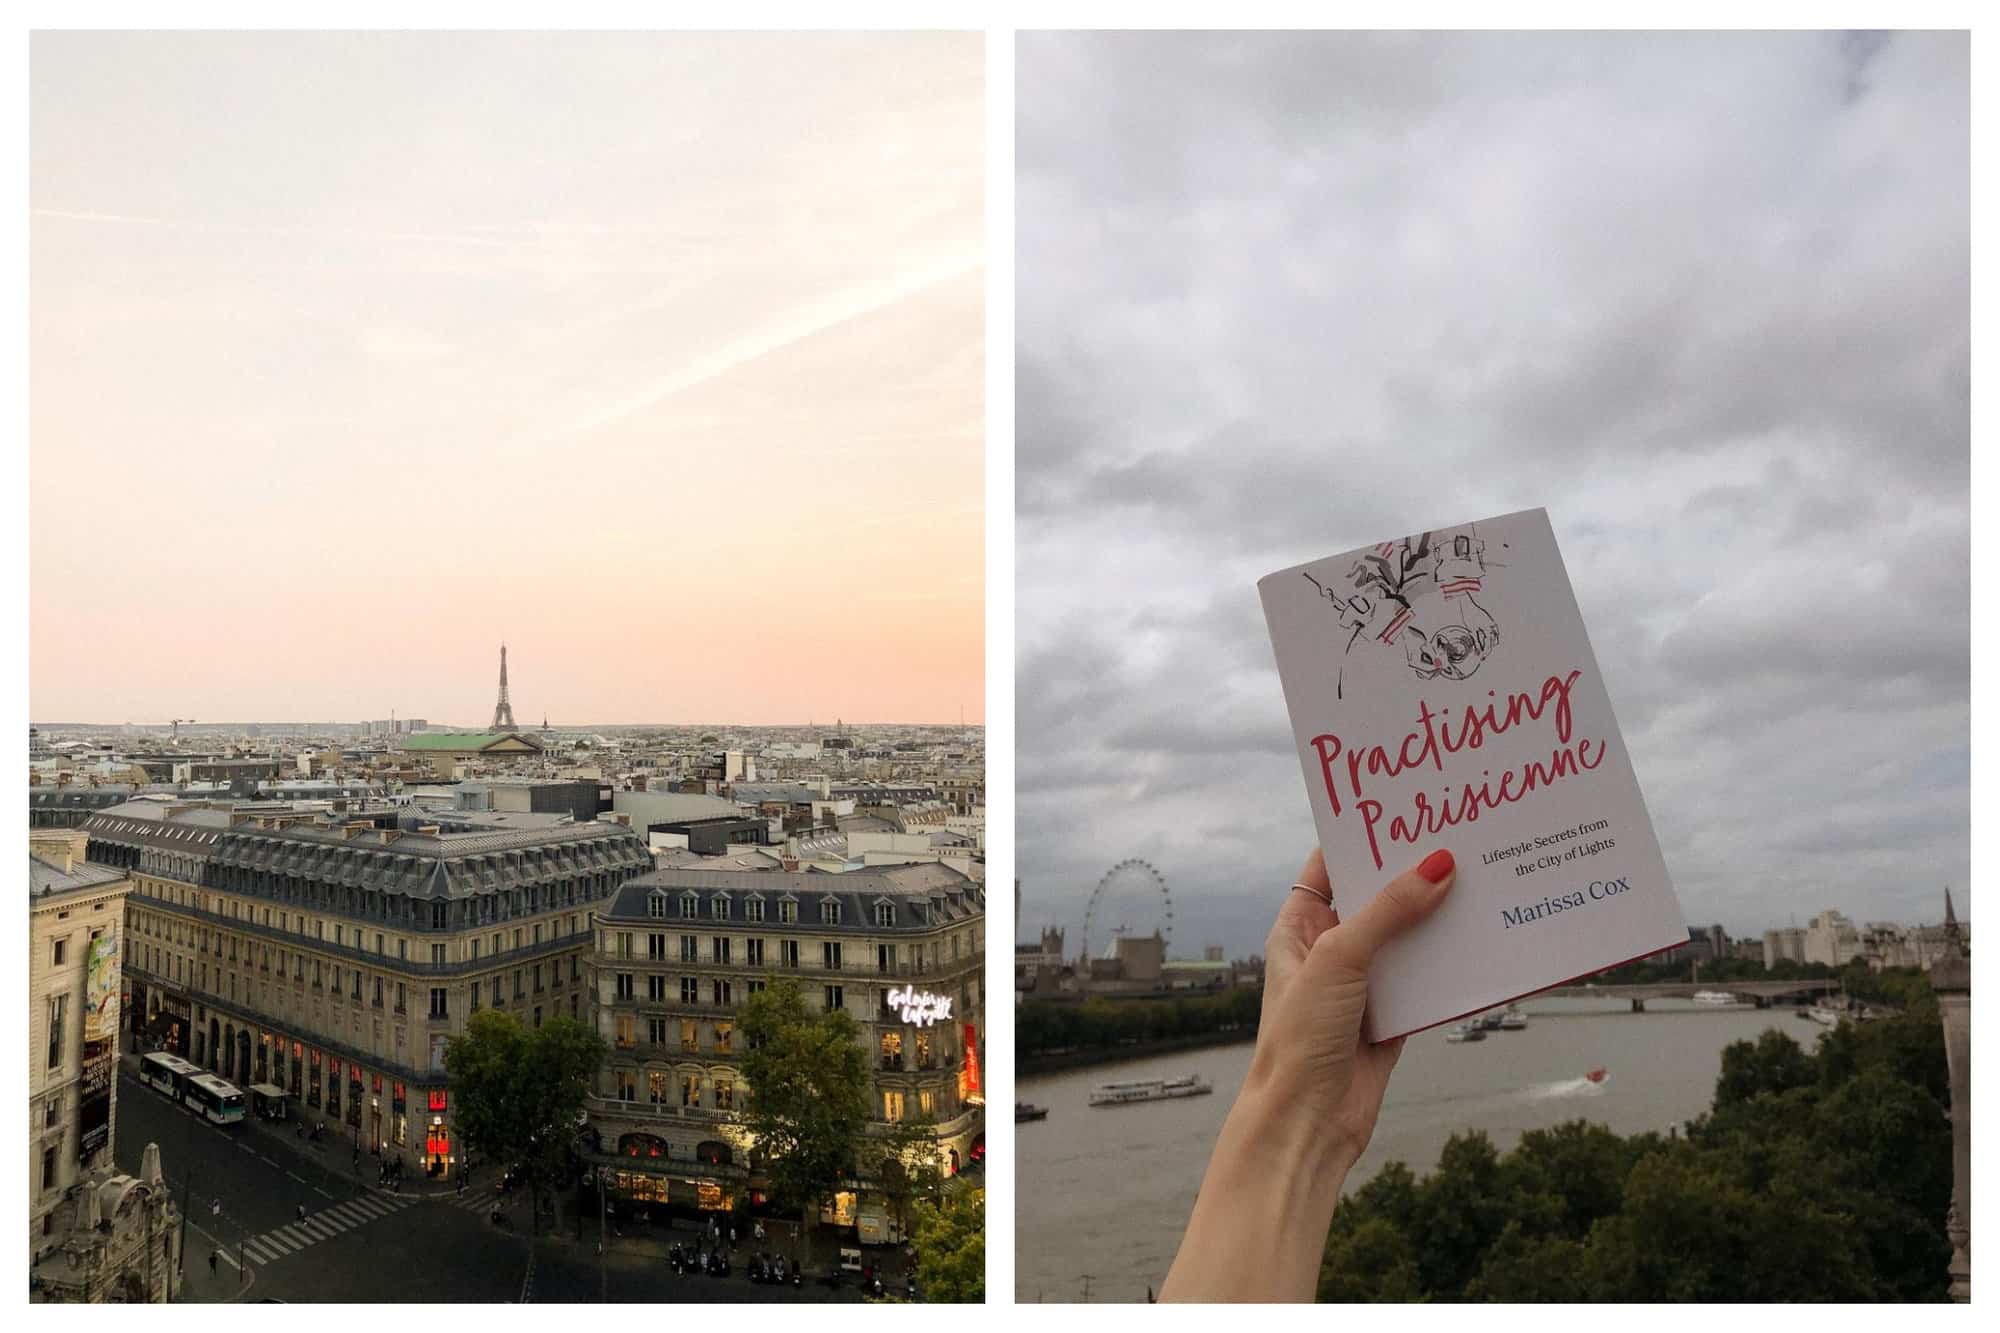 Left: a picture of Paris taken on a building rooftop, where several haussaman buildings can be seen and the eiffel tower in the foreground. Right: a picture of a book titled Practising Parisienne by Marissa Cox in London. 